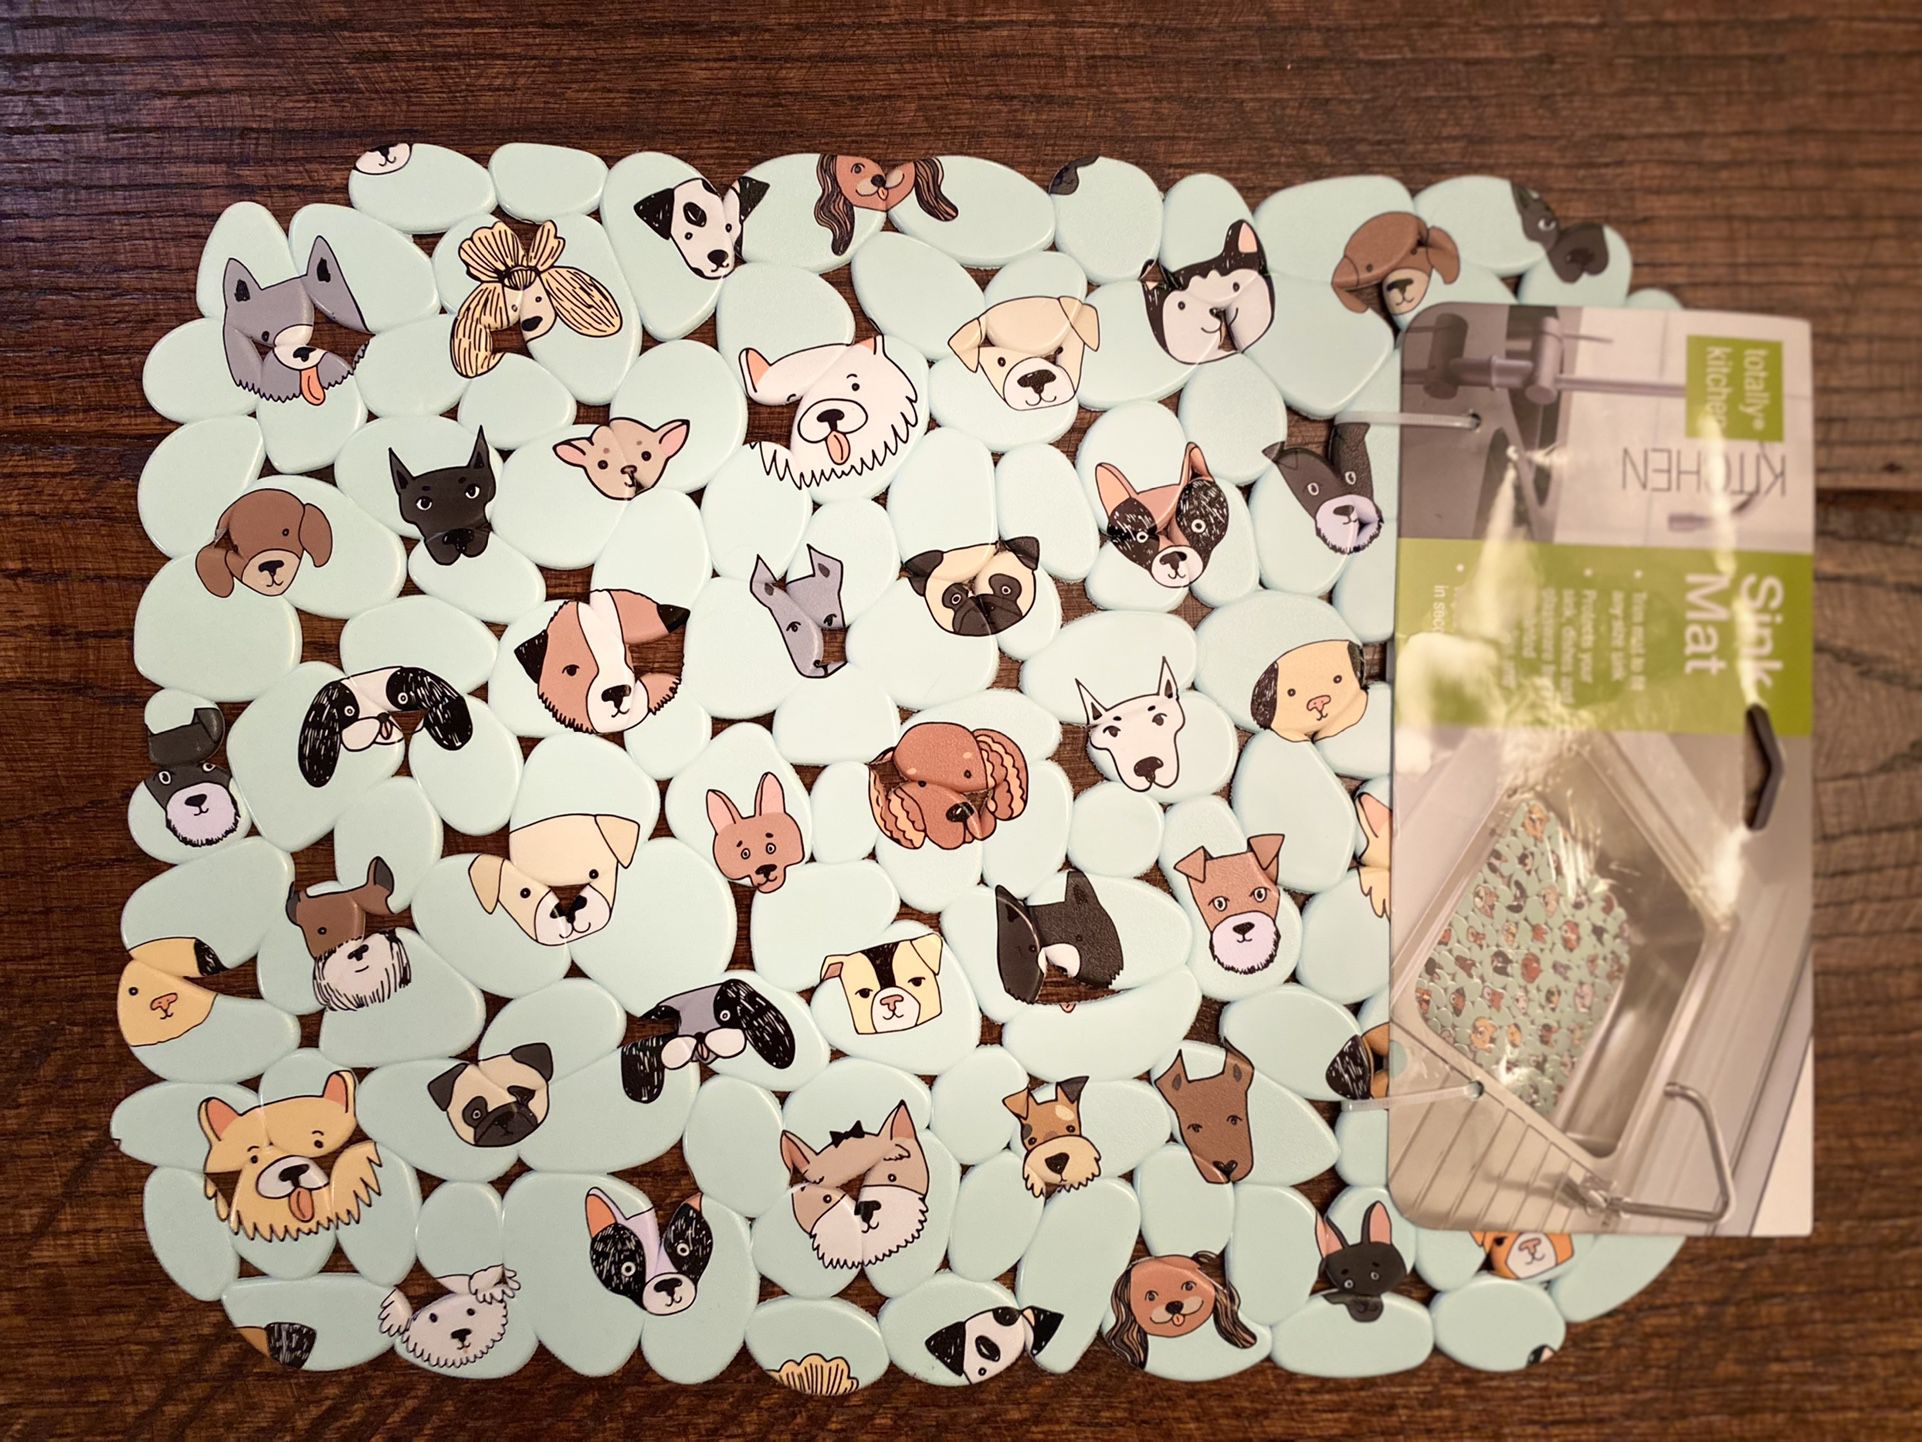 Dog Themed Sink Mat By Totally Kitchen, Various Breeds Of Dogs Faces 🐶